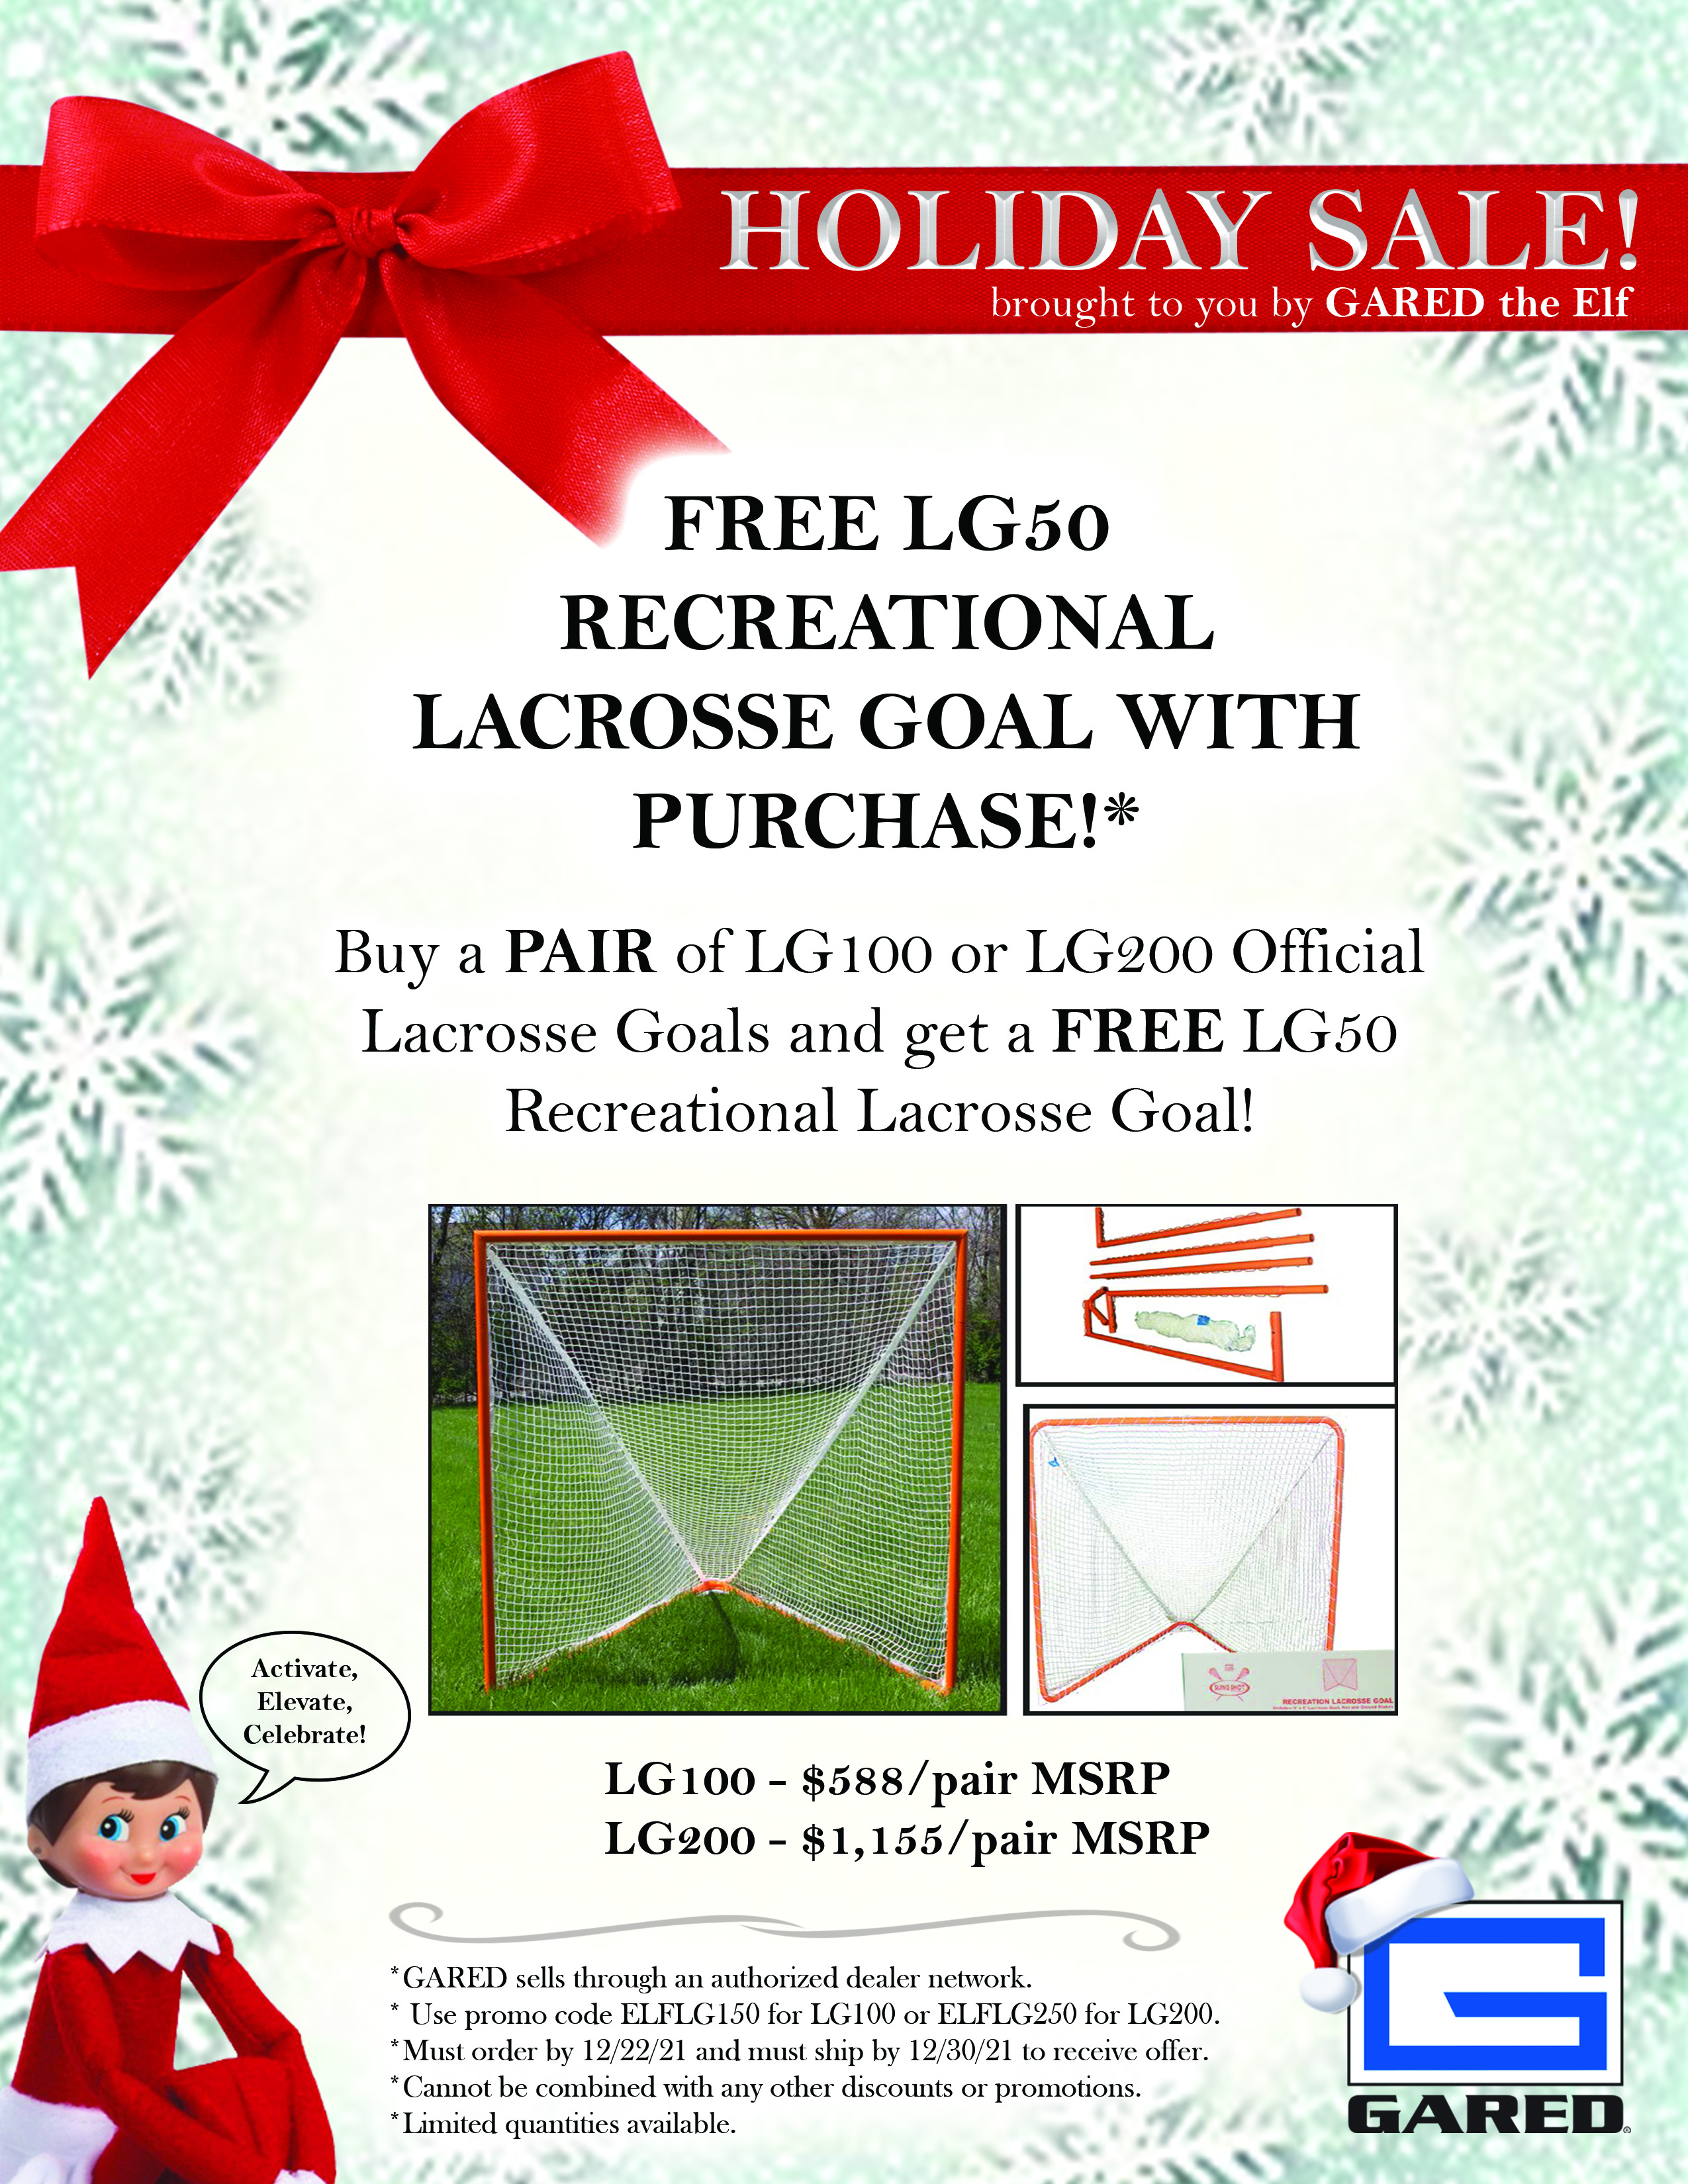 Elf Sale - Free LG50 with Official Lacrosse Goals